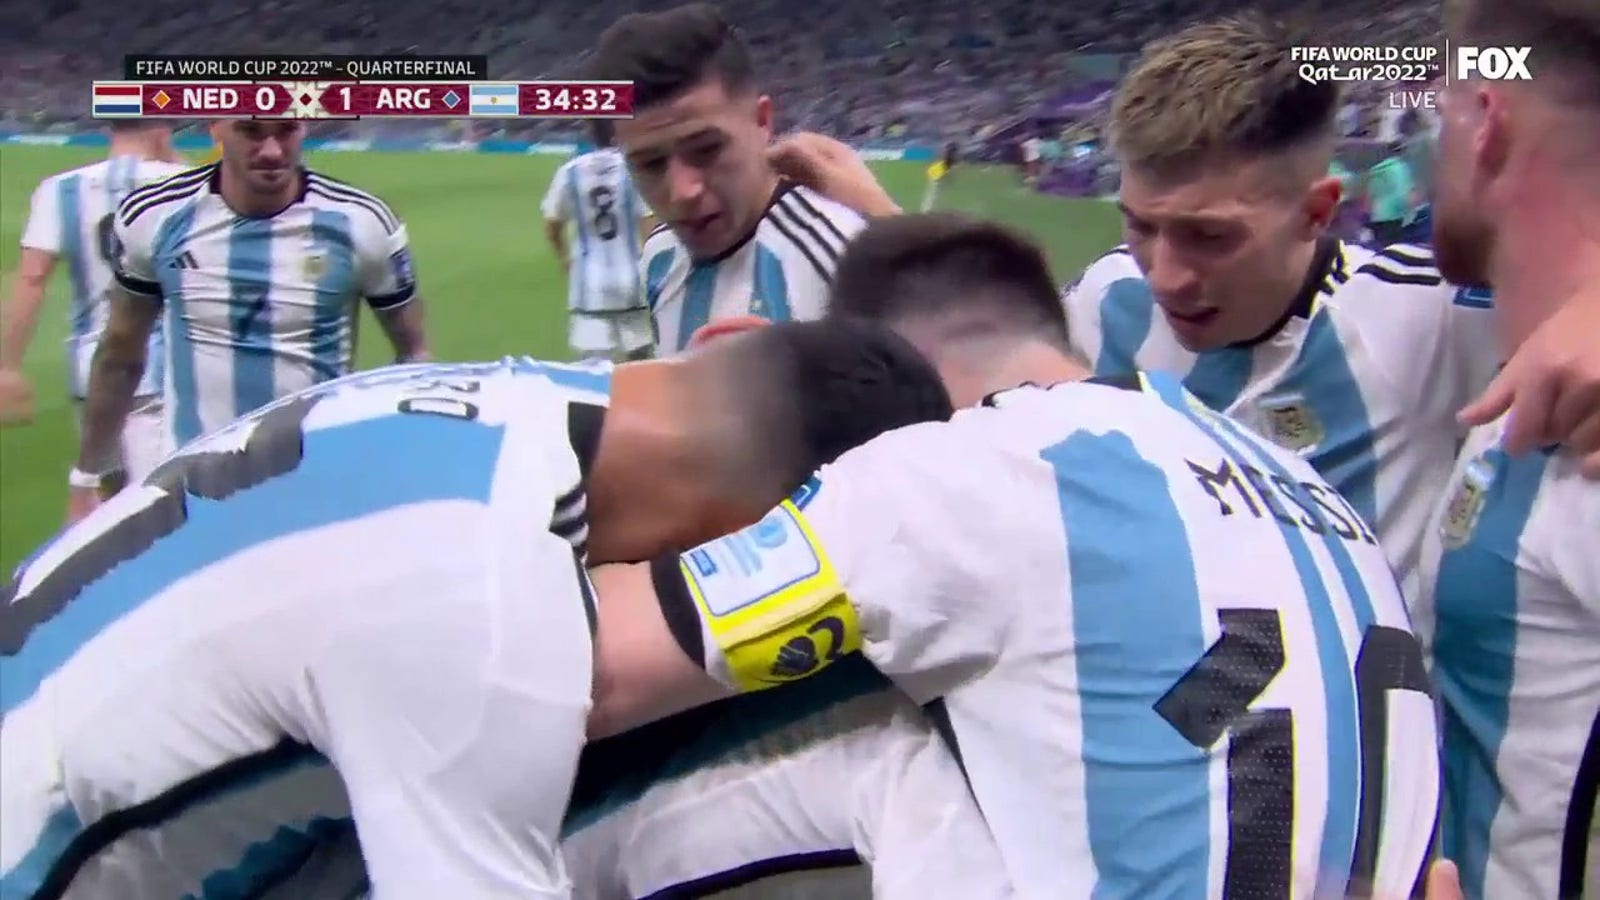 Nahuel Molina of Argentina scored against the Netherlands in 34 minutes 